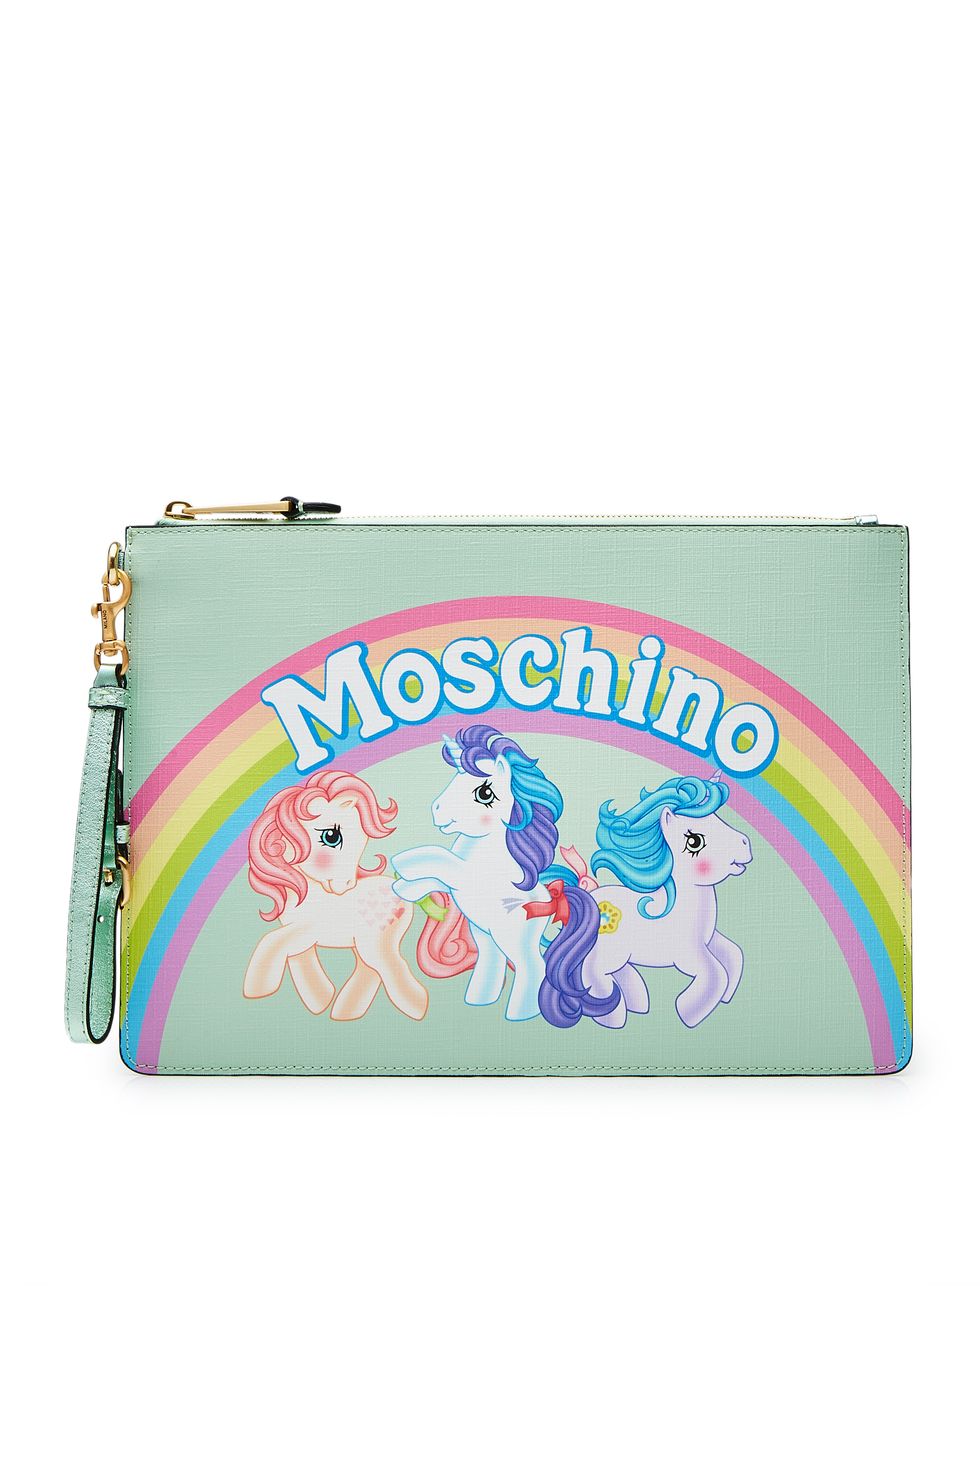 Handbag, Bag, Coin purse, Fashion accessory, Pencil case, Wristlet, Wallet, Luggage and bags, Fictional character, Zipper, 